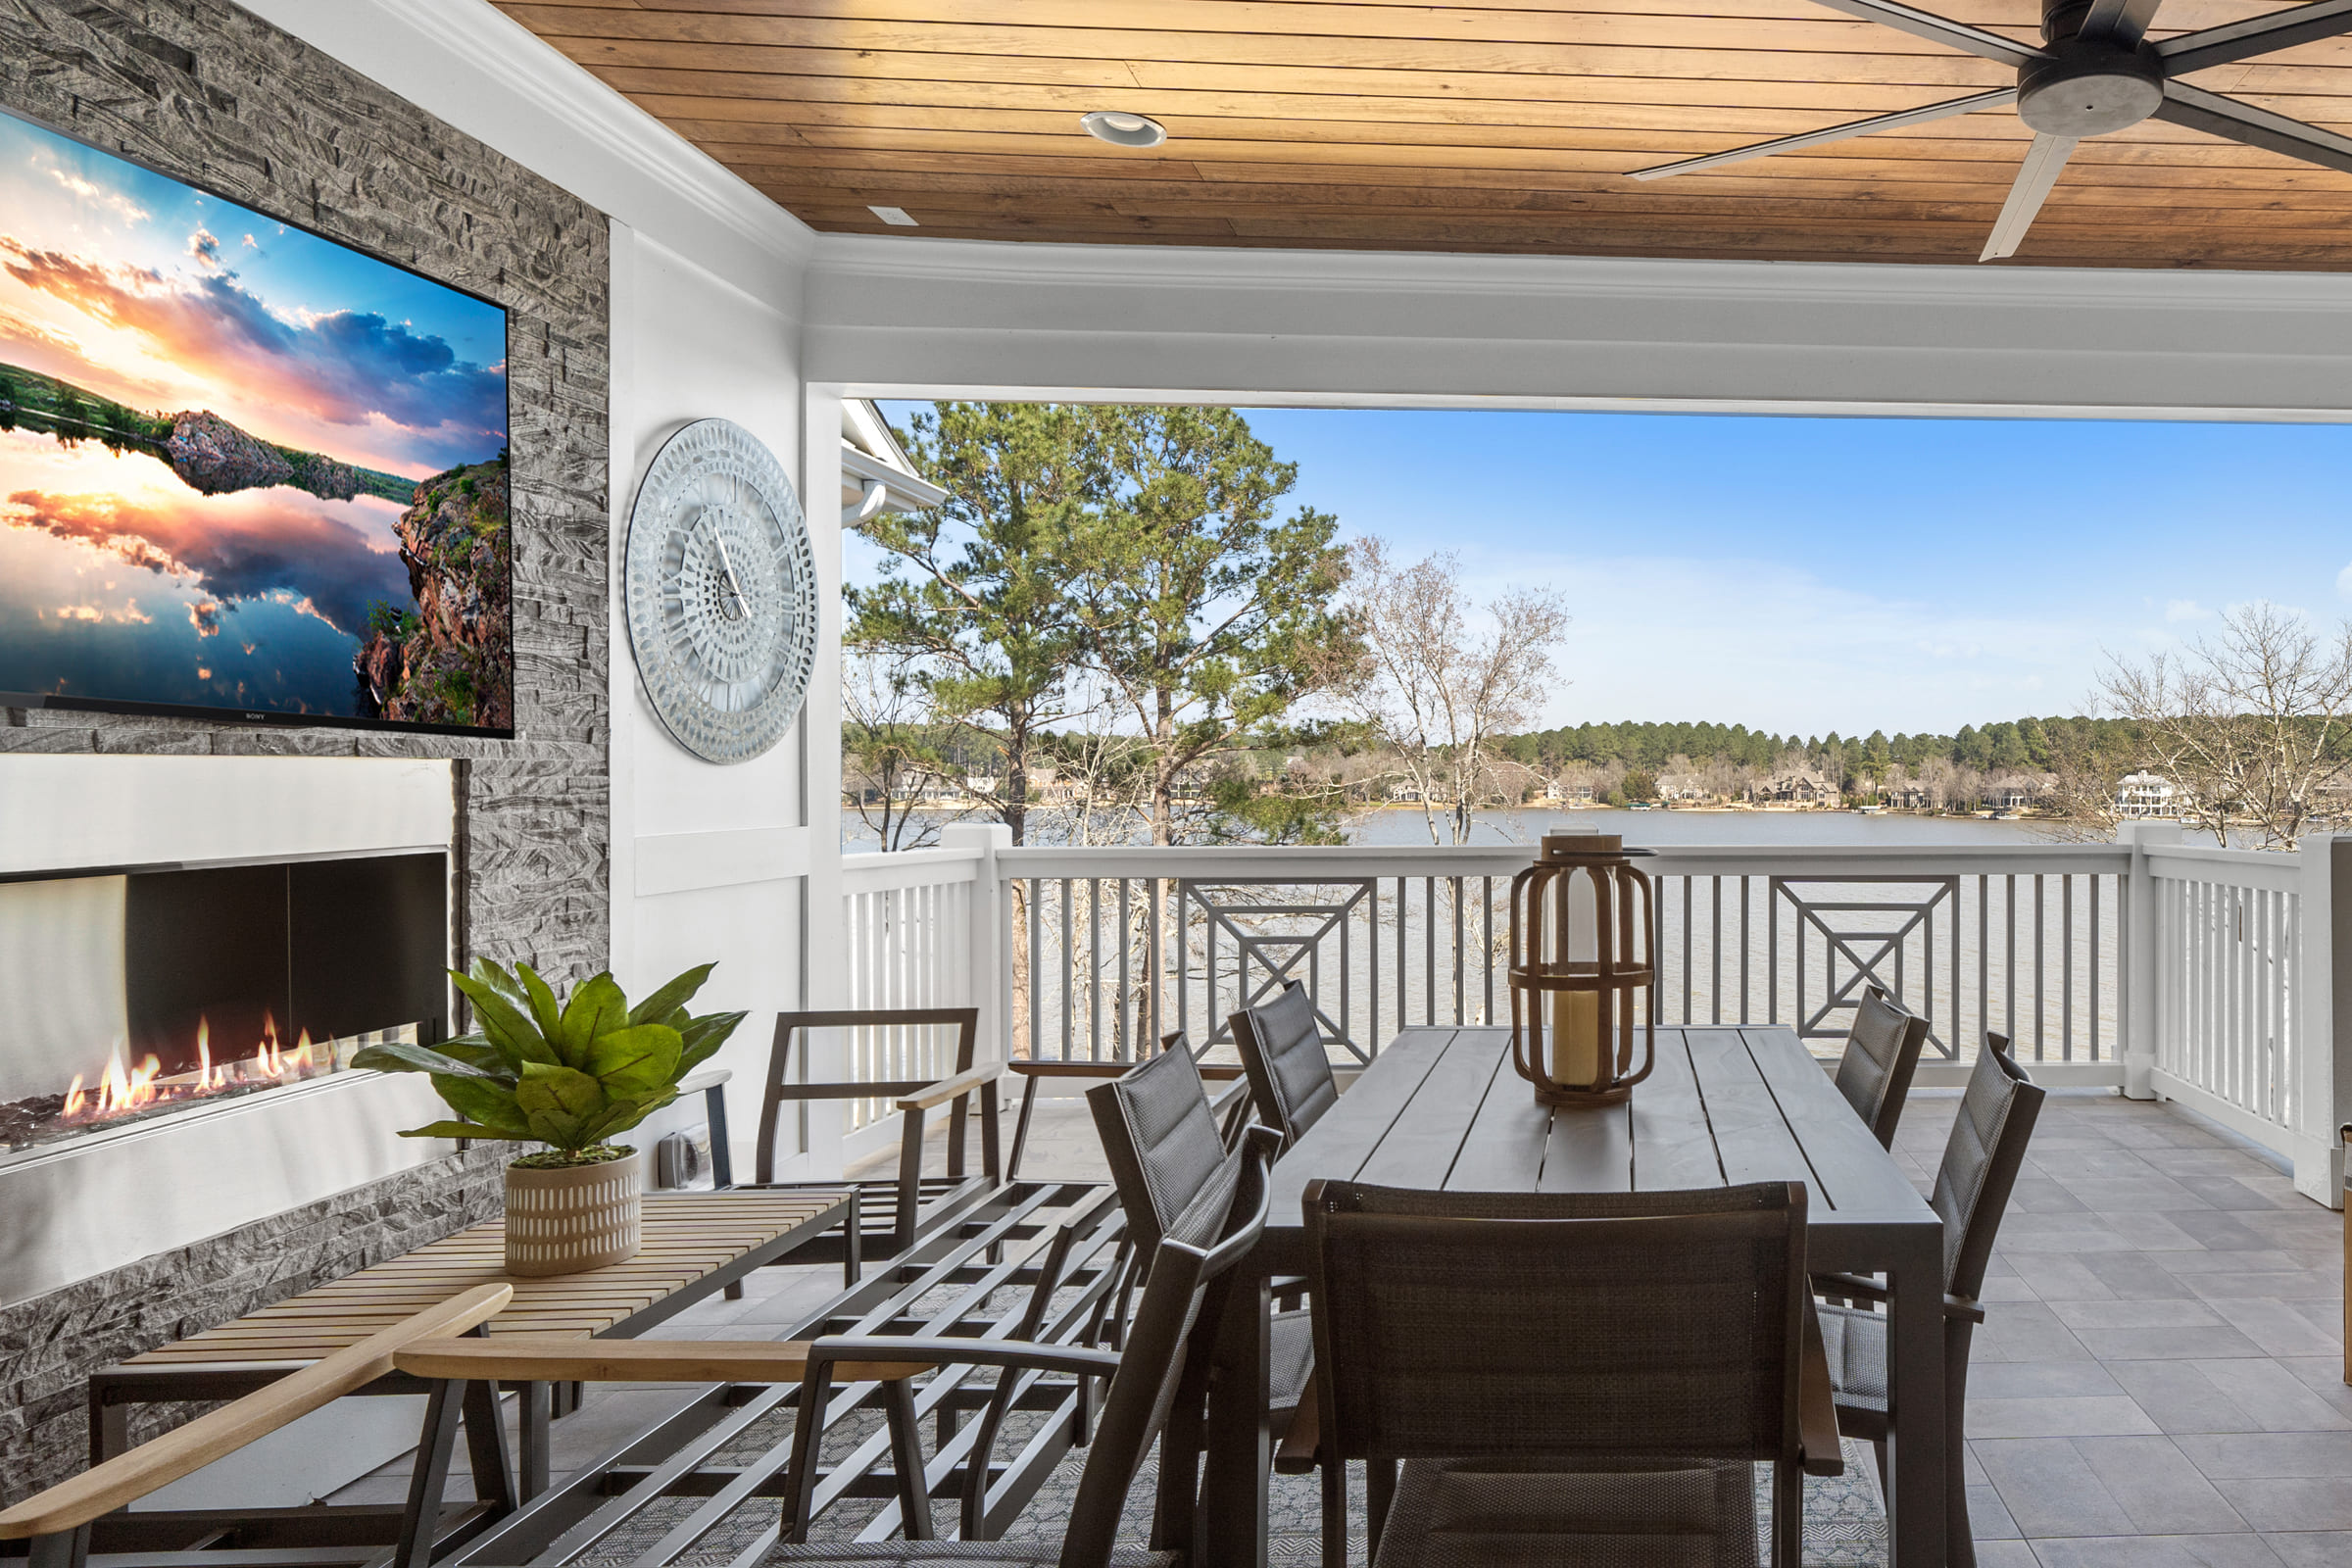 Deck with Built-in Stone Fire Place and TV with Beautiful Lake View |PAXISgroup